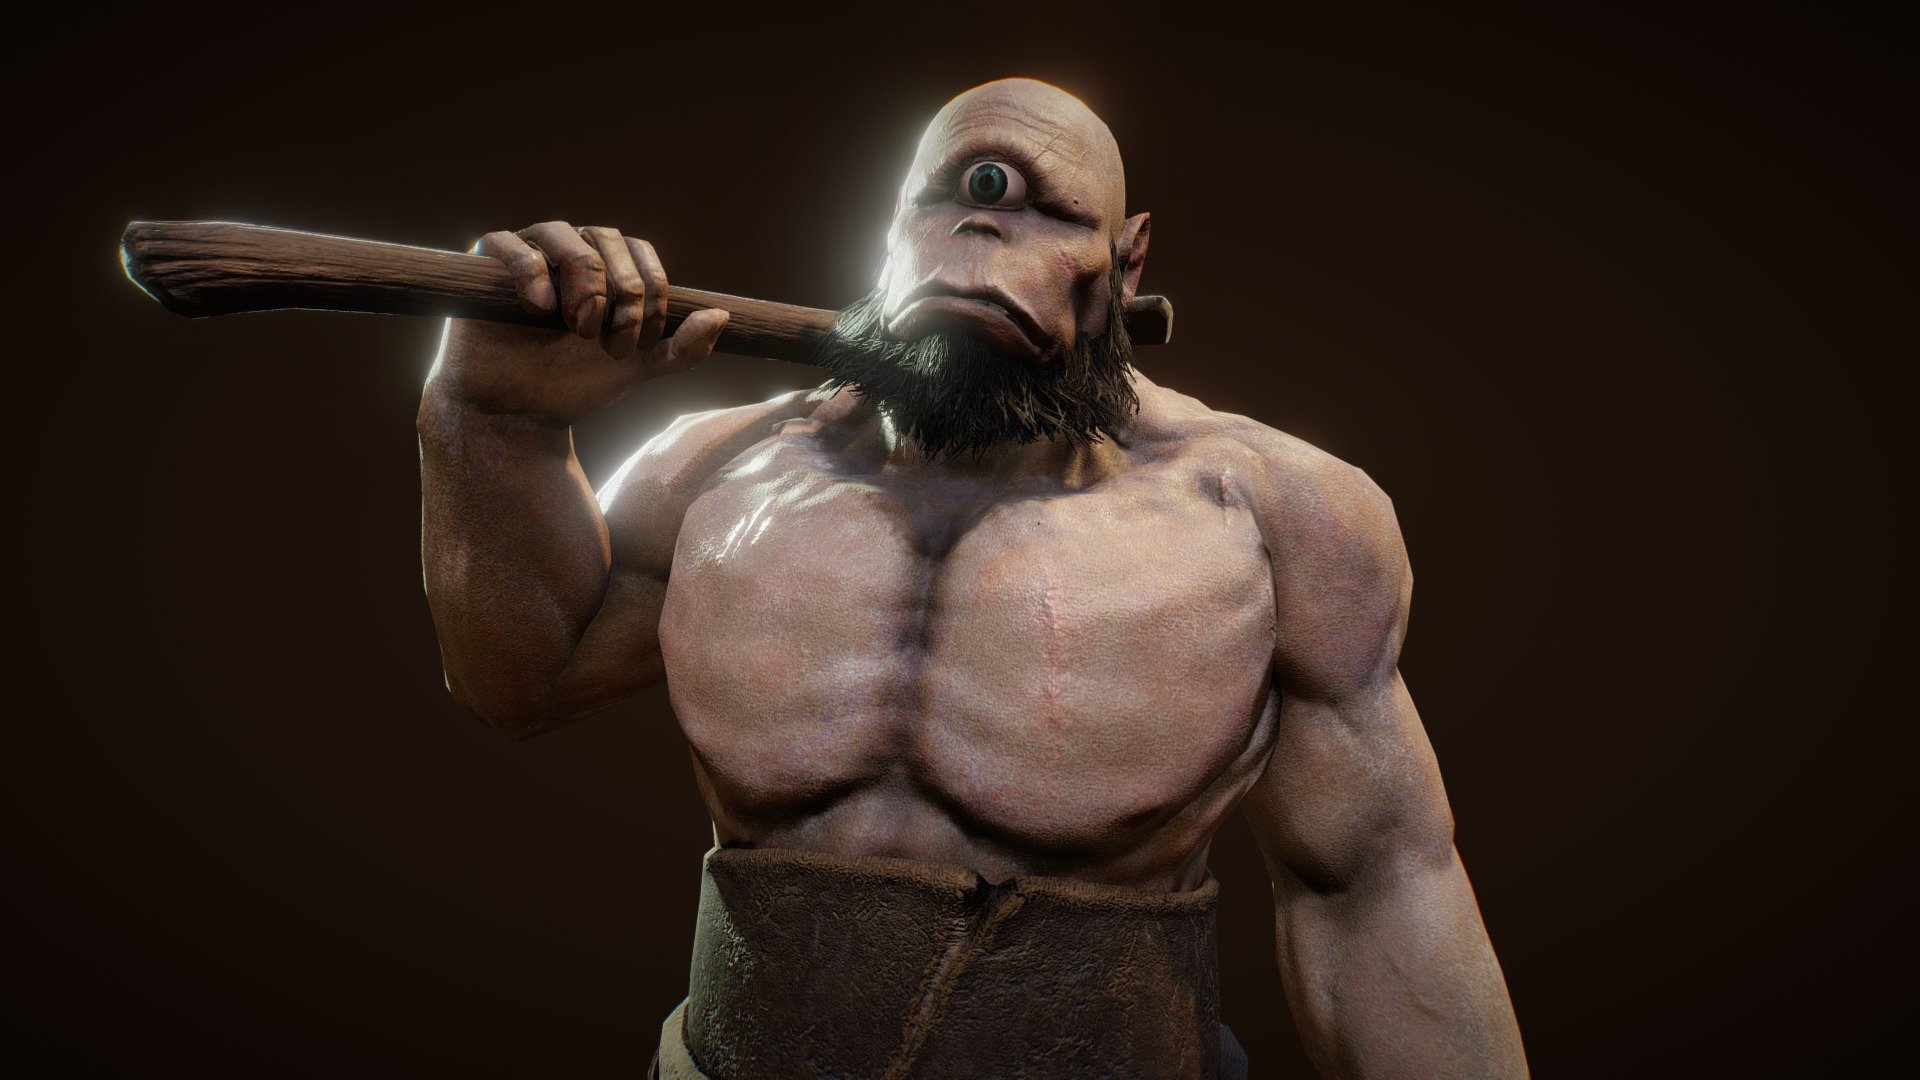 High Quality Cyclop model with rig and 23 animations ready to be used in your projects.



Mace is separated mesh attached to the hand. So you can change his weapon as you like.

Cyclop 39,821 tris

Mace 1,022 tris 

PBR materials with several texture sizes are used.




Textures:

4096x4096 (4)

2048x2048(4)

1024x1024(9)

256x256 (1)




Animations:

Idle 1

Idle 2

Idle 3

Idle 4

Walk

Walk Reverse

Walk Right

Walk Left

Run

Run Left

Run Right

Battle Pose

Attack 1

Attack 2

Attack 3

Attack 4

Attack 5

Knockback 1

Knockback 2

Knockback 3

Knockback 4

Dead

Dead 2



Compatible with Unity3d and Unreal Engine 4

Check the full animations on youtube 
https://www.youtube.com/watch?v=6sBjTPzqBxU - Cyclop - Buy Royalty Free 3D model by willpowaproject 3d model